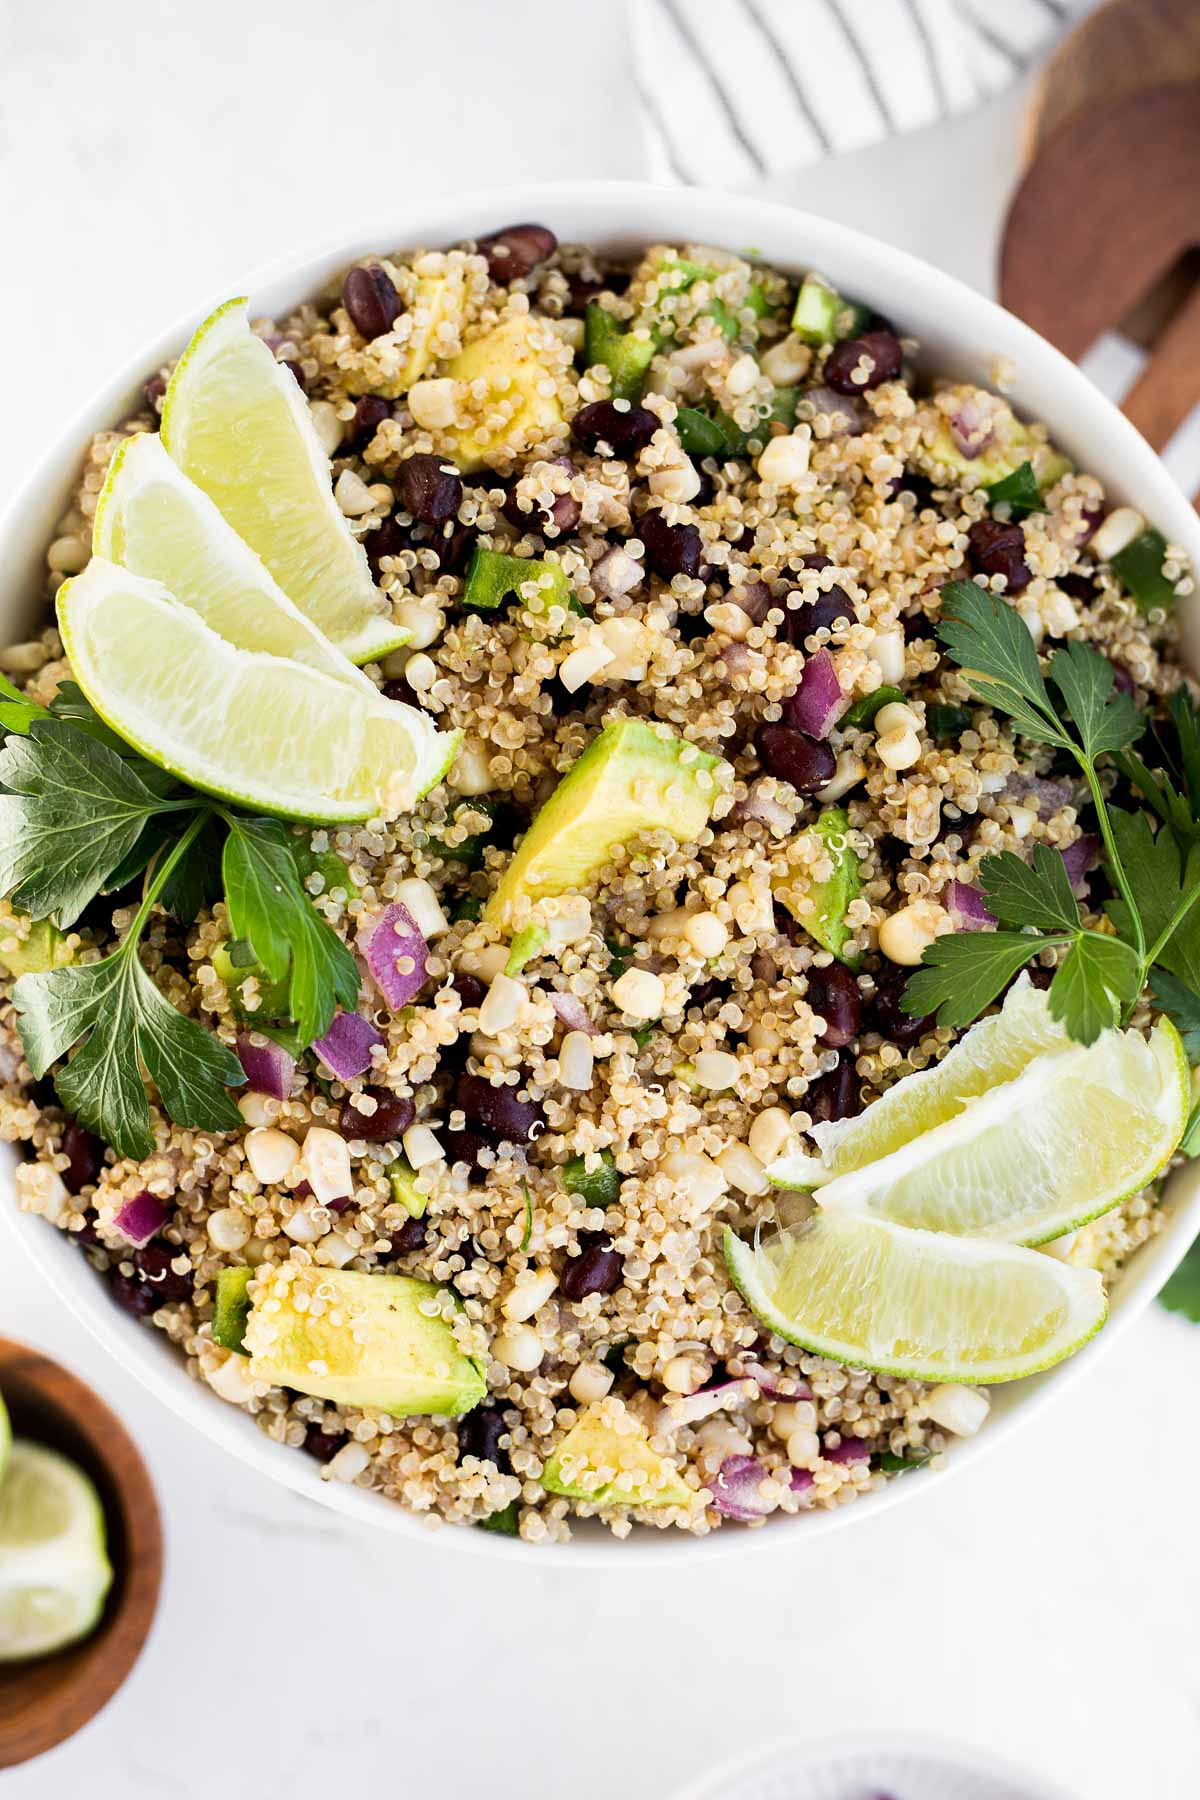 Vertical image of quinoa salad with black beans and corn garnished with lime wedges and cilantro.